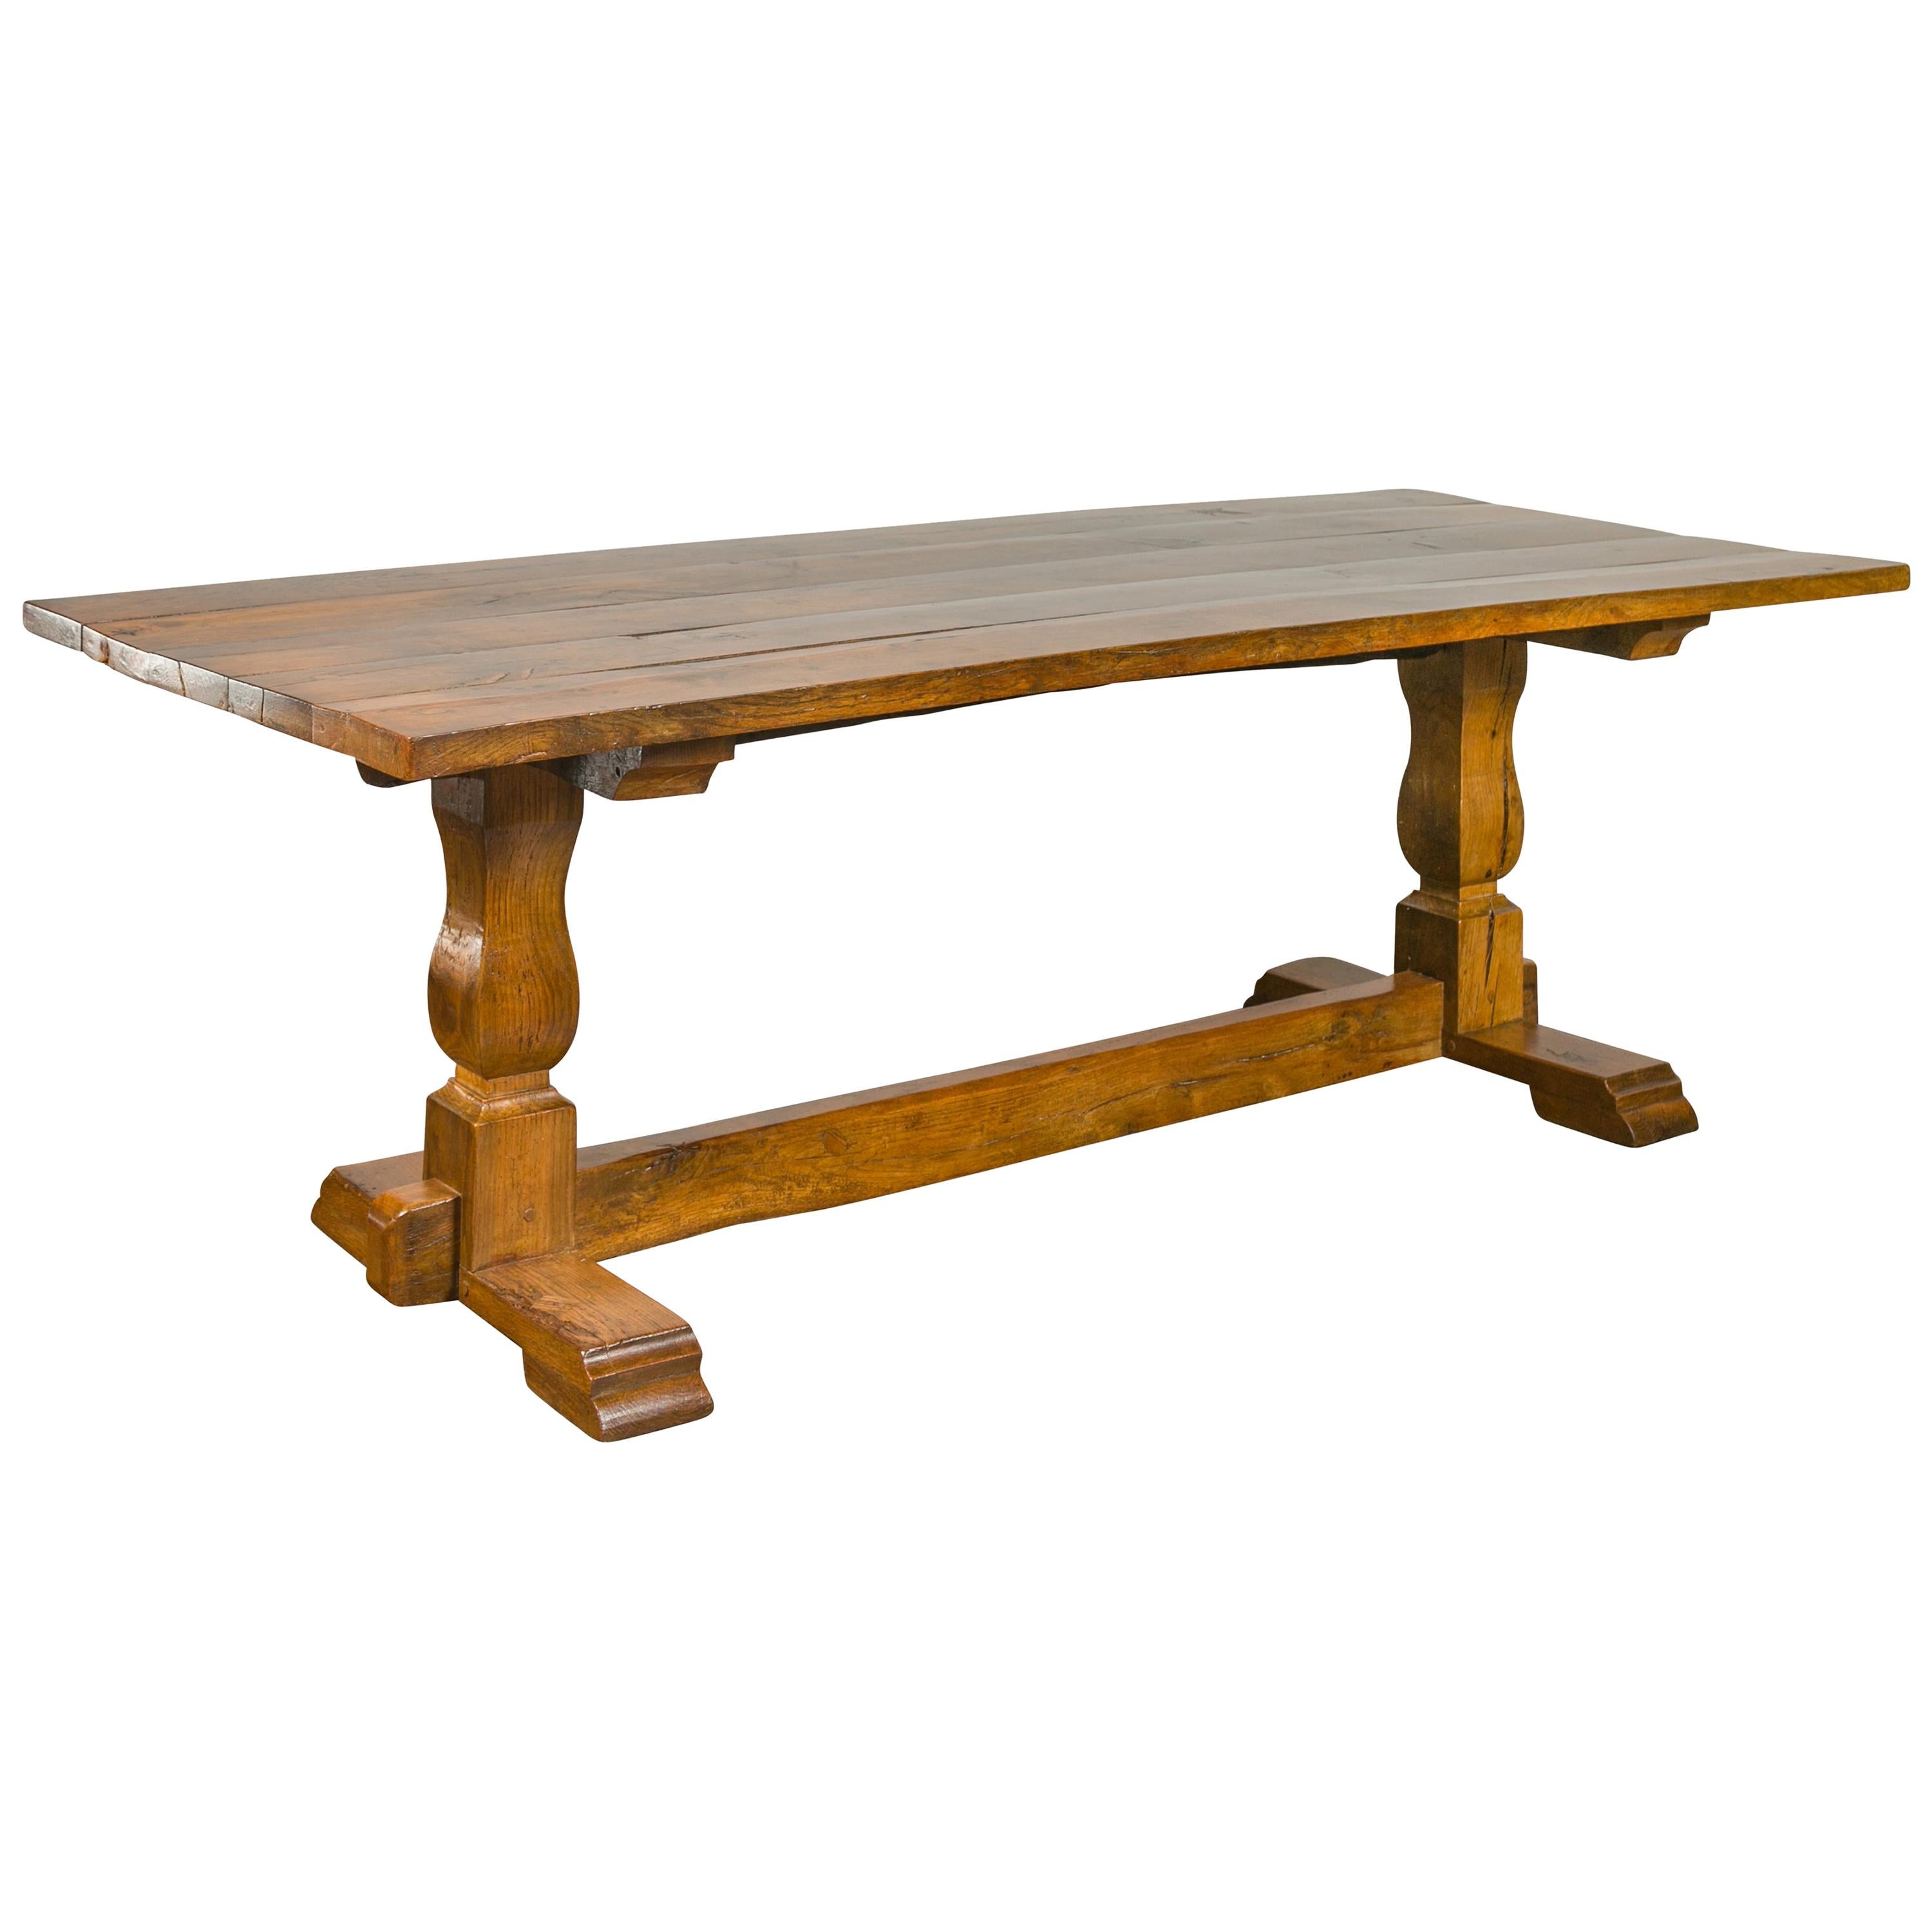 English 1870s Elm and Walnut Farm Table with Trestle Base and Baluster Legs